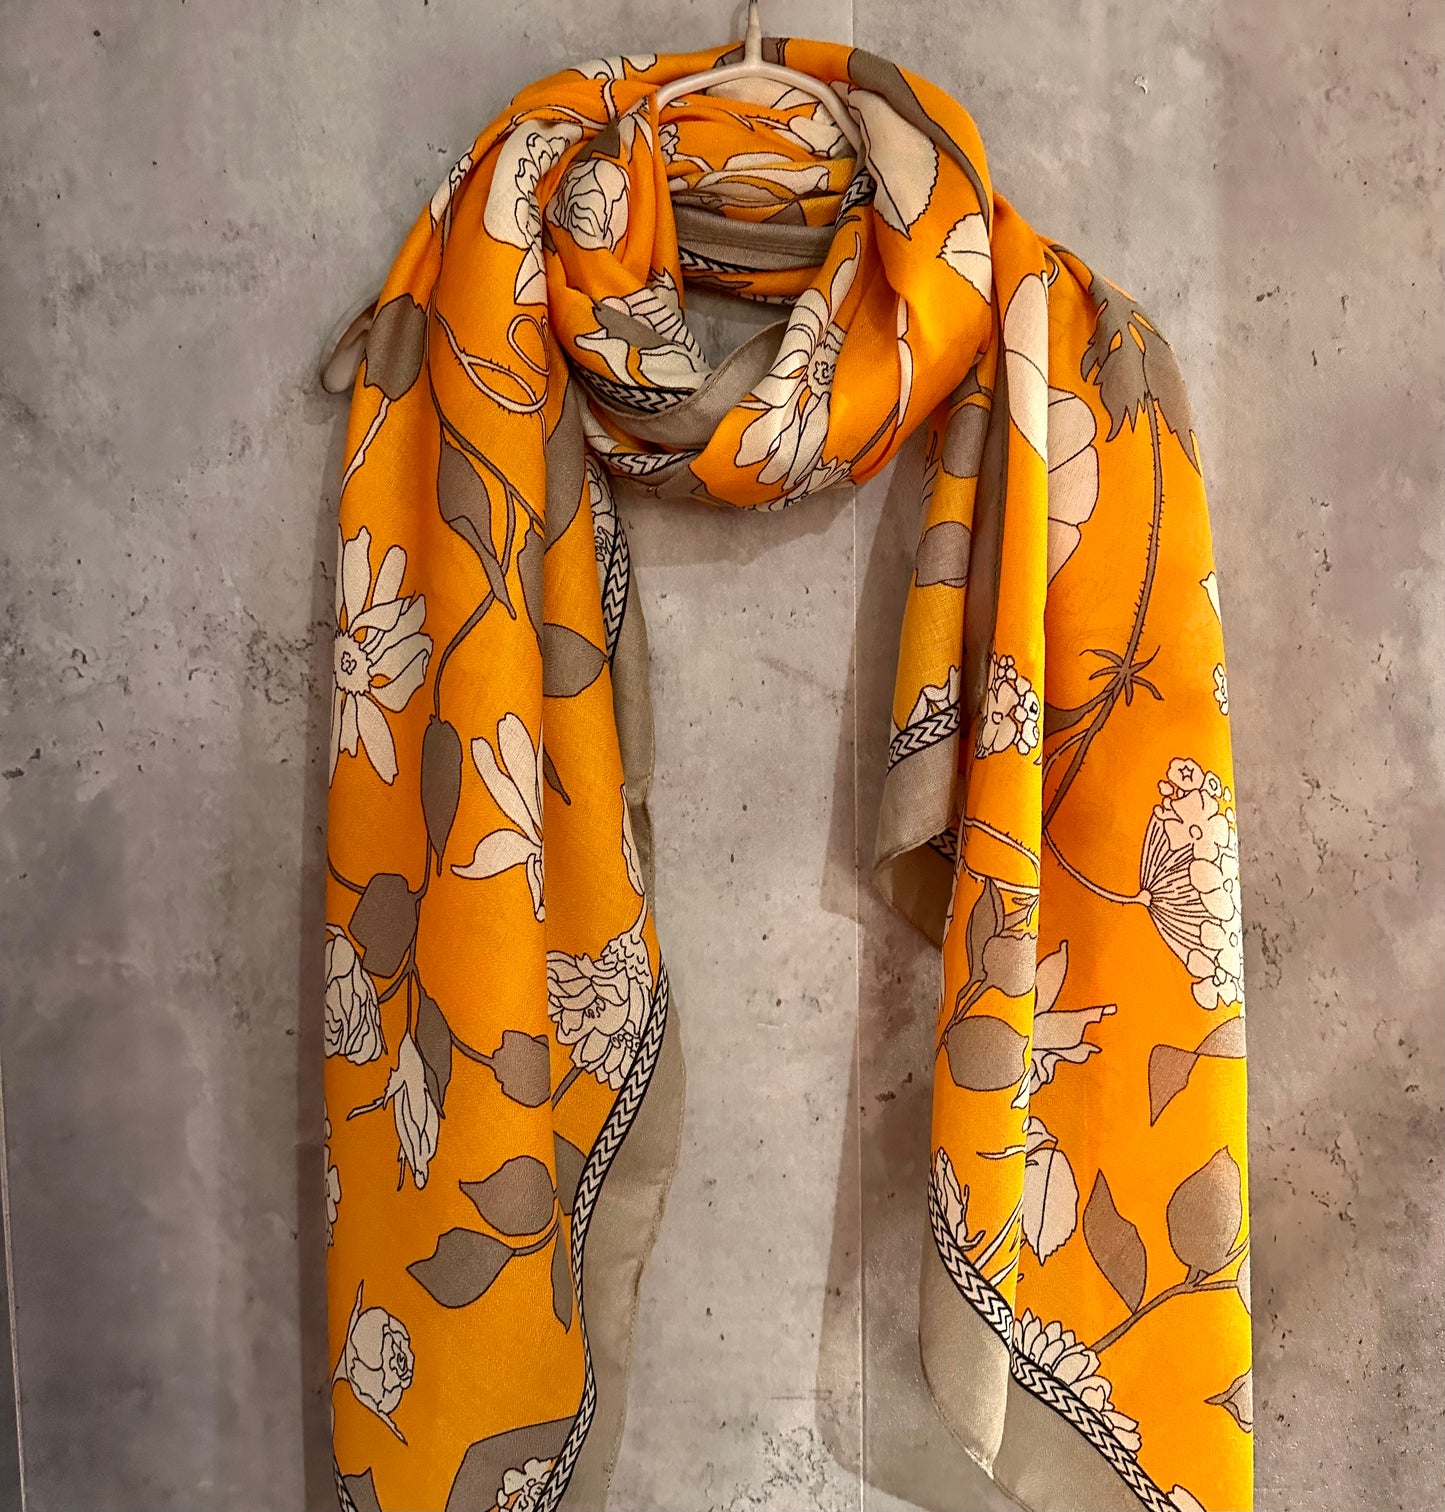 Sketched Flowers Orange Cotton Scarf/Summer Autumn Scarf/Scarf Women/Gifts For Mom/Gifts For Her Birthday Christmas/UK Seller